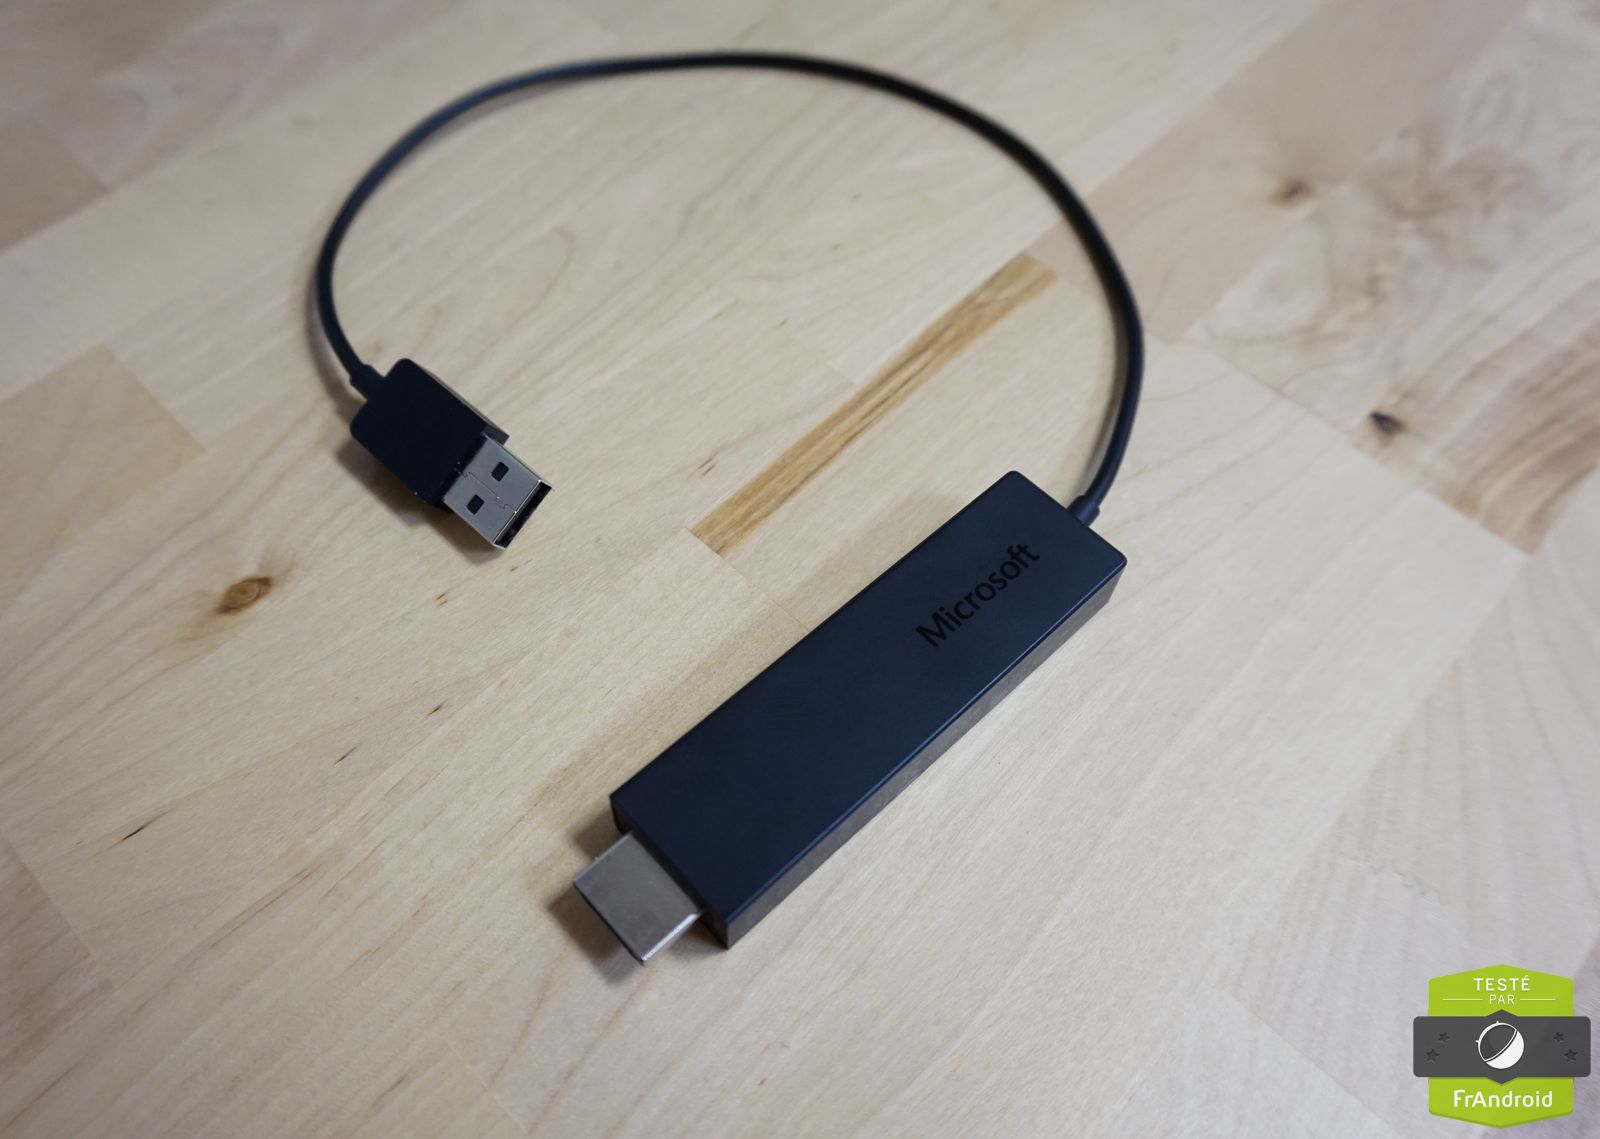 https://images.frandroid.com/wp-content/uploads/2015/02/microsoft-wireless-display-adapter-test-2.jpg